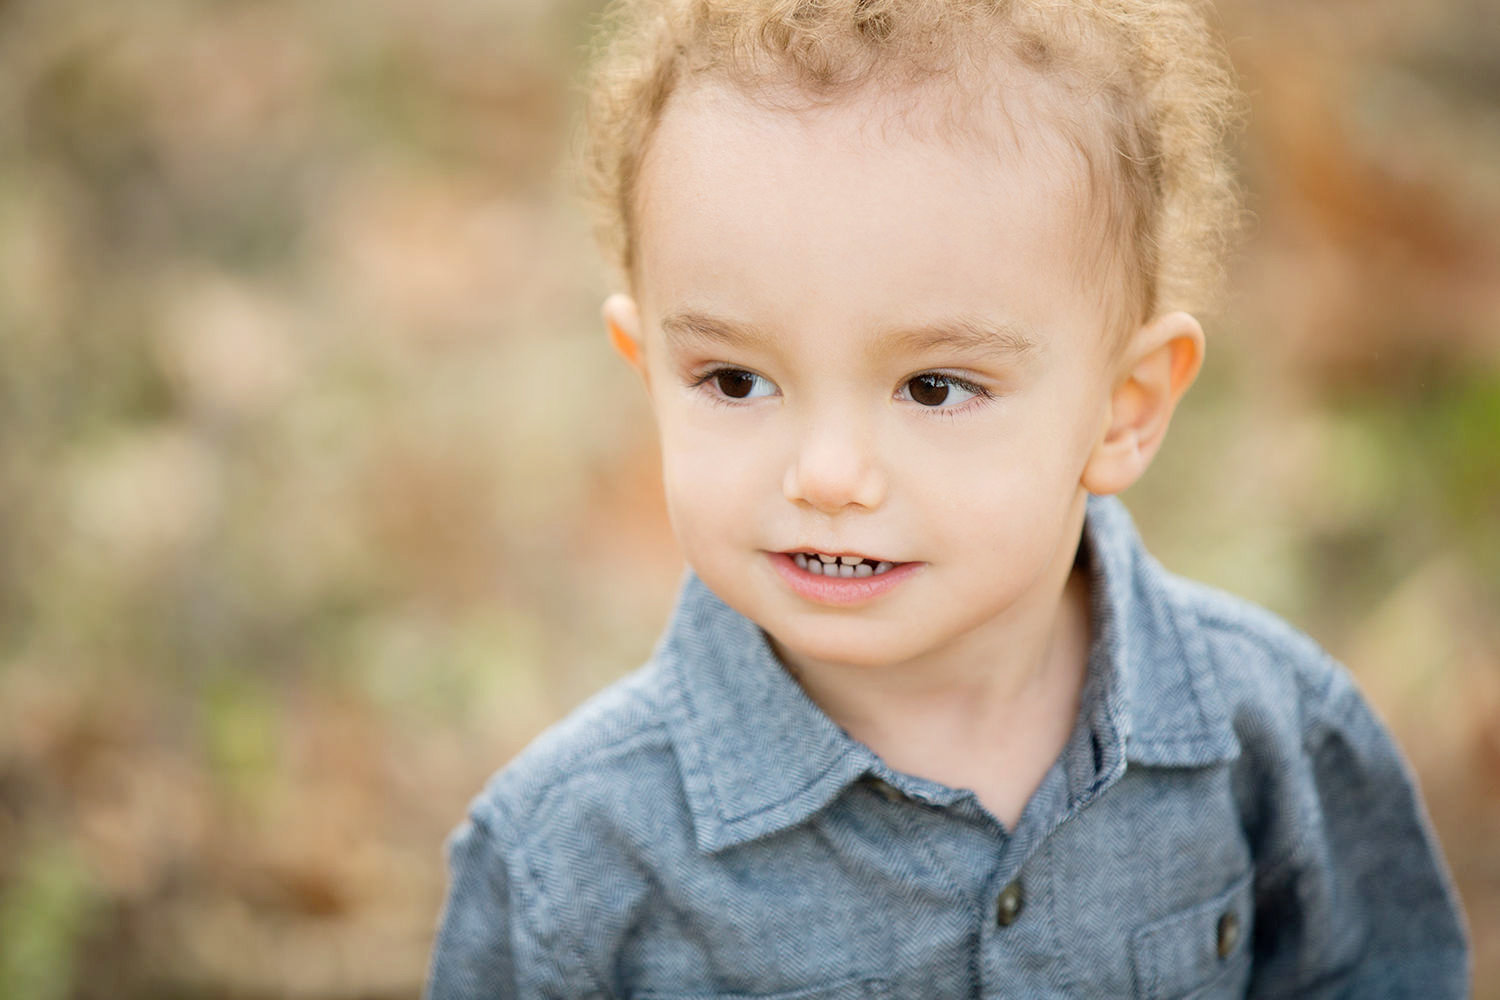 san diego family photographer | little boy with fall colors and blue shirt